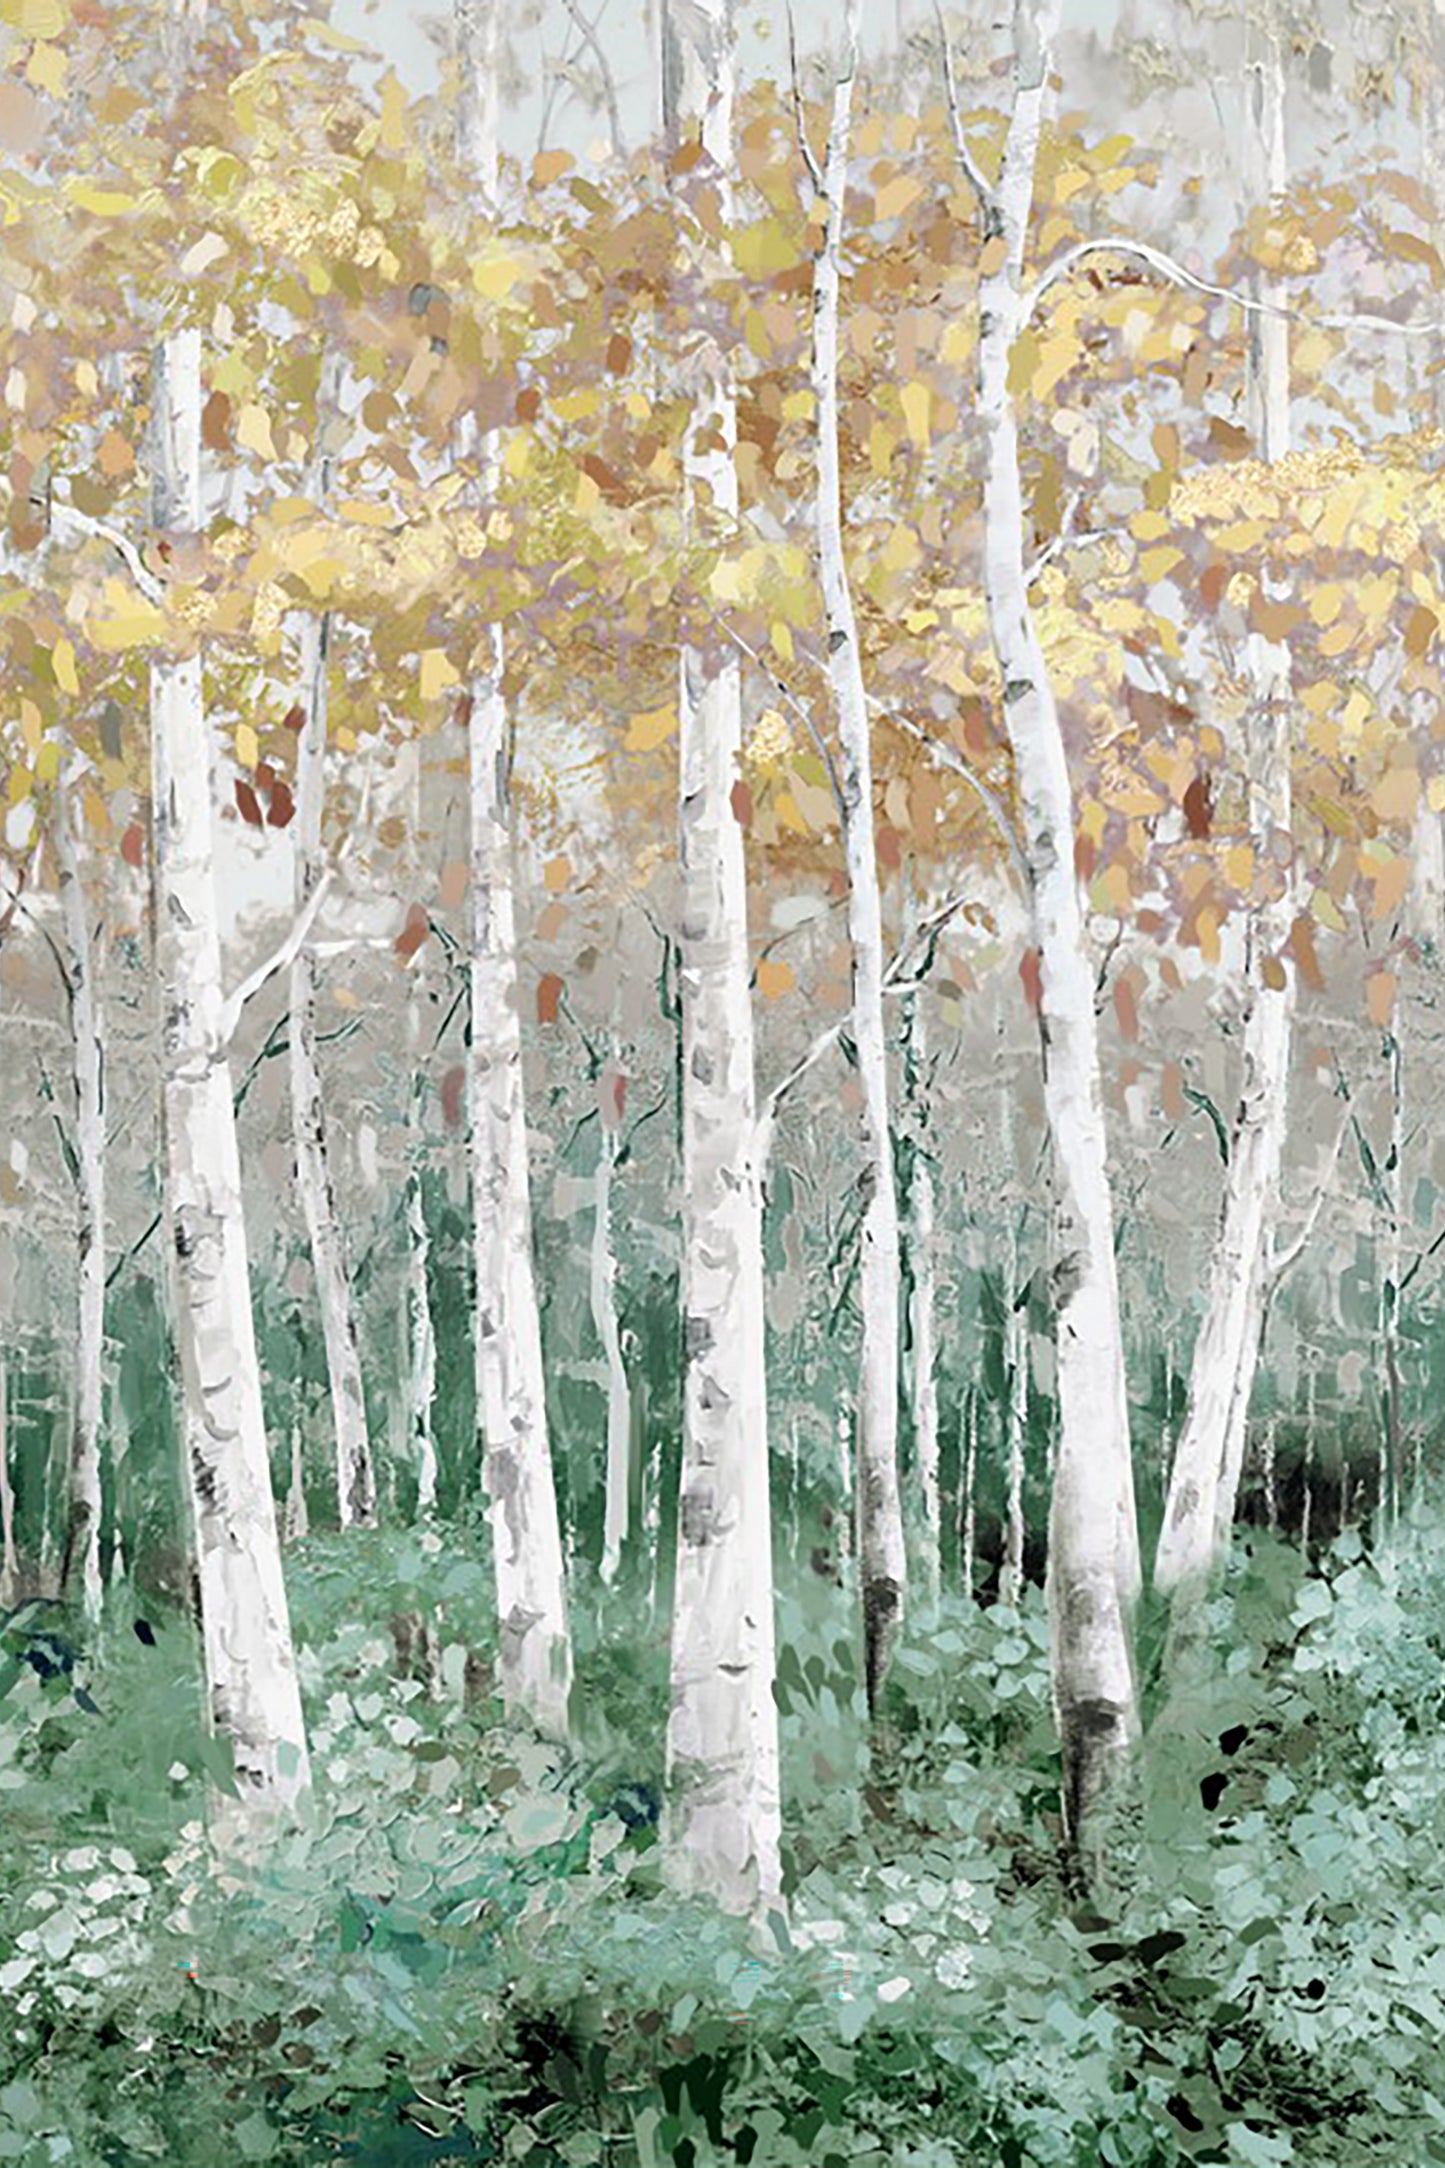 Hand-painted Art "Golden Woods" Painting original, Canvas Wall art for living room, bedroom, office, entryway - Wrapped Canvas Painting